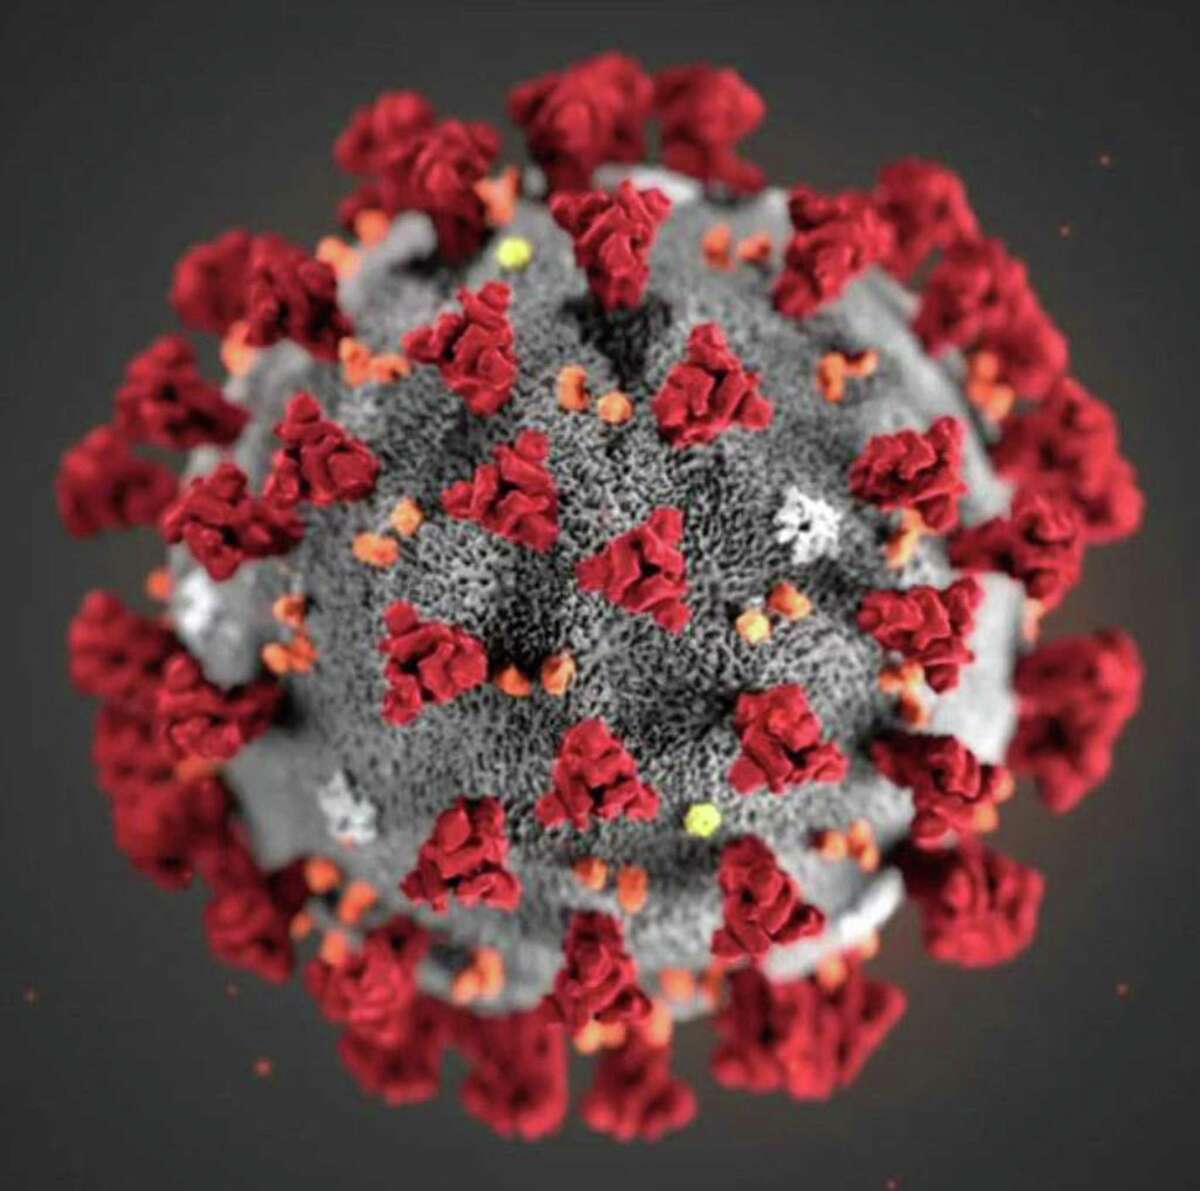 A COVID-19 particle is pictured in this image provided by the CDC. (Centers for Disease Control and Prevention)